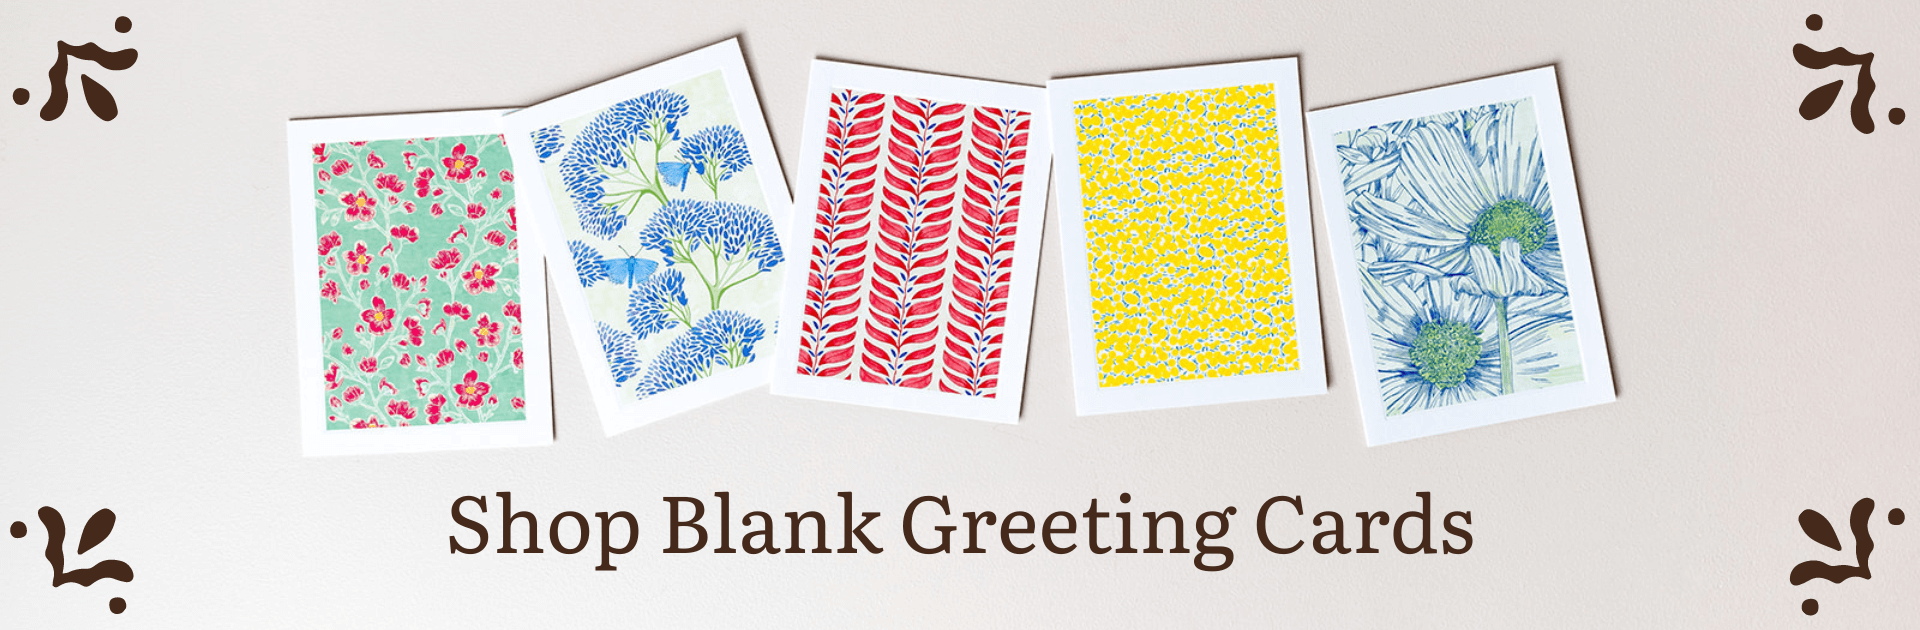 Shop Blank Greeting Cards